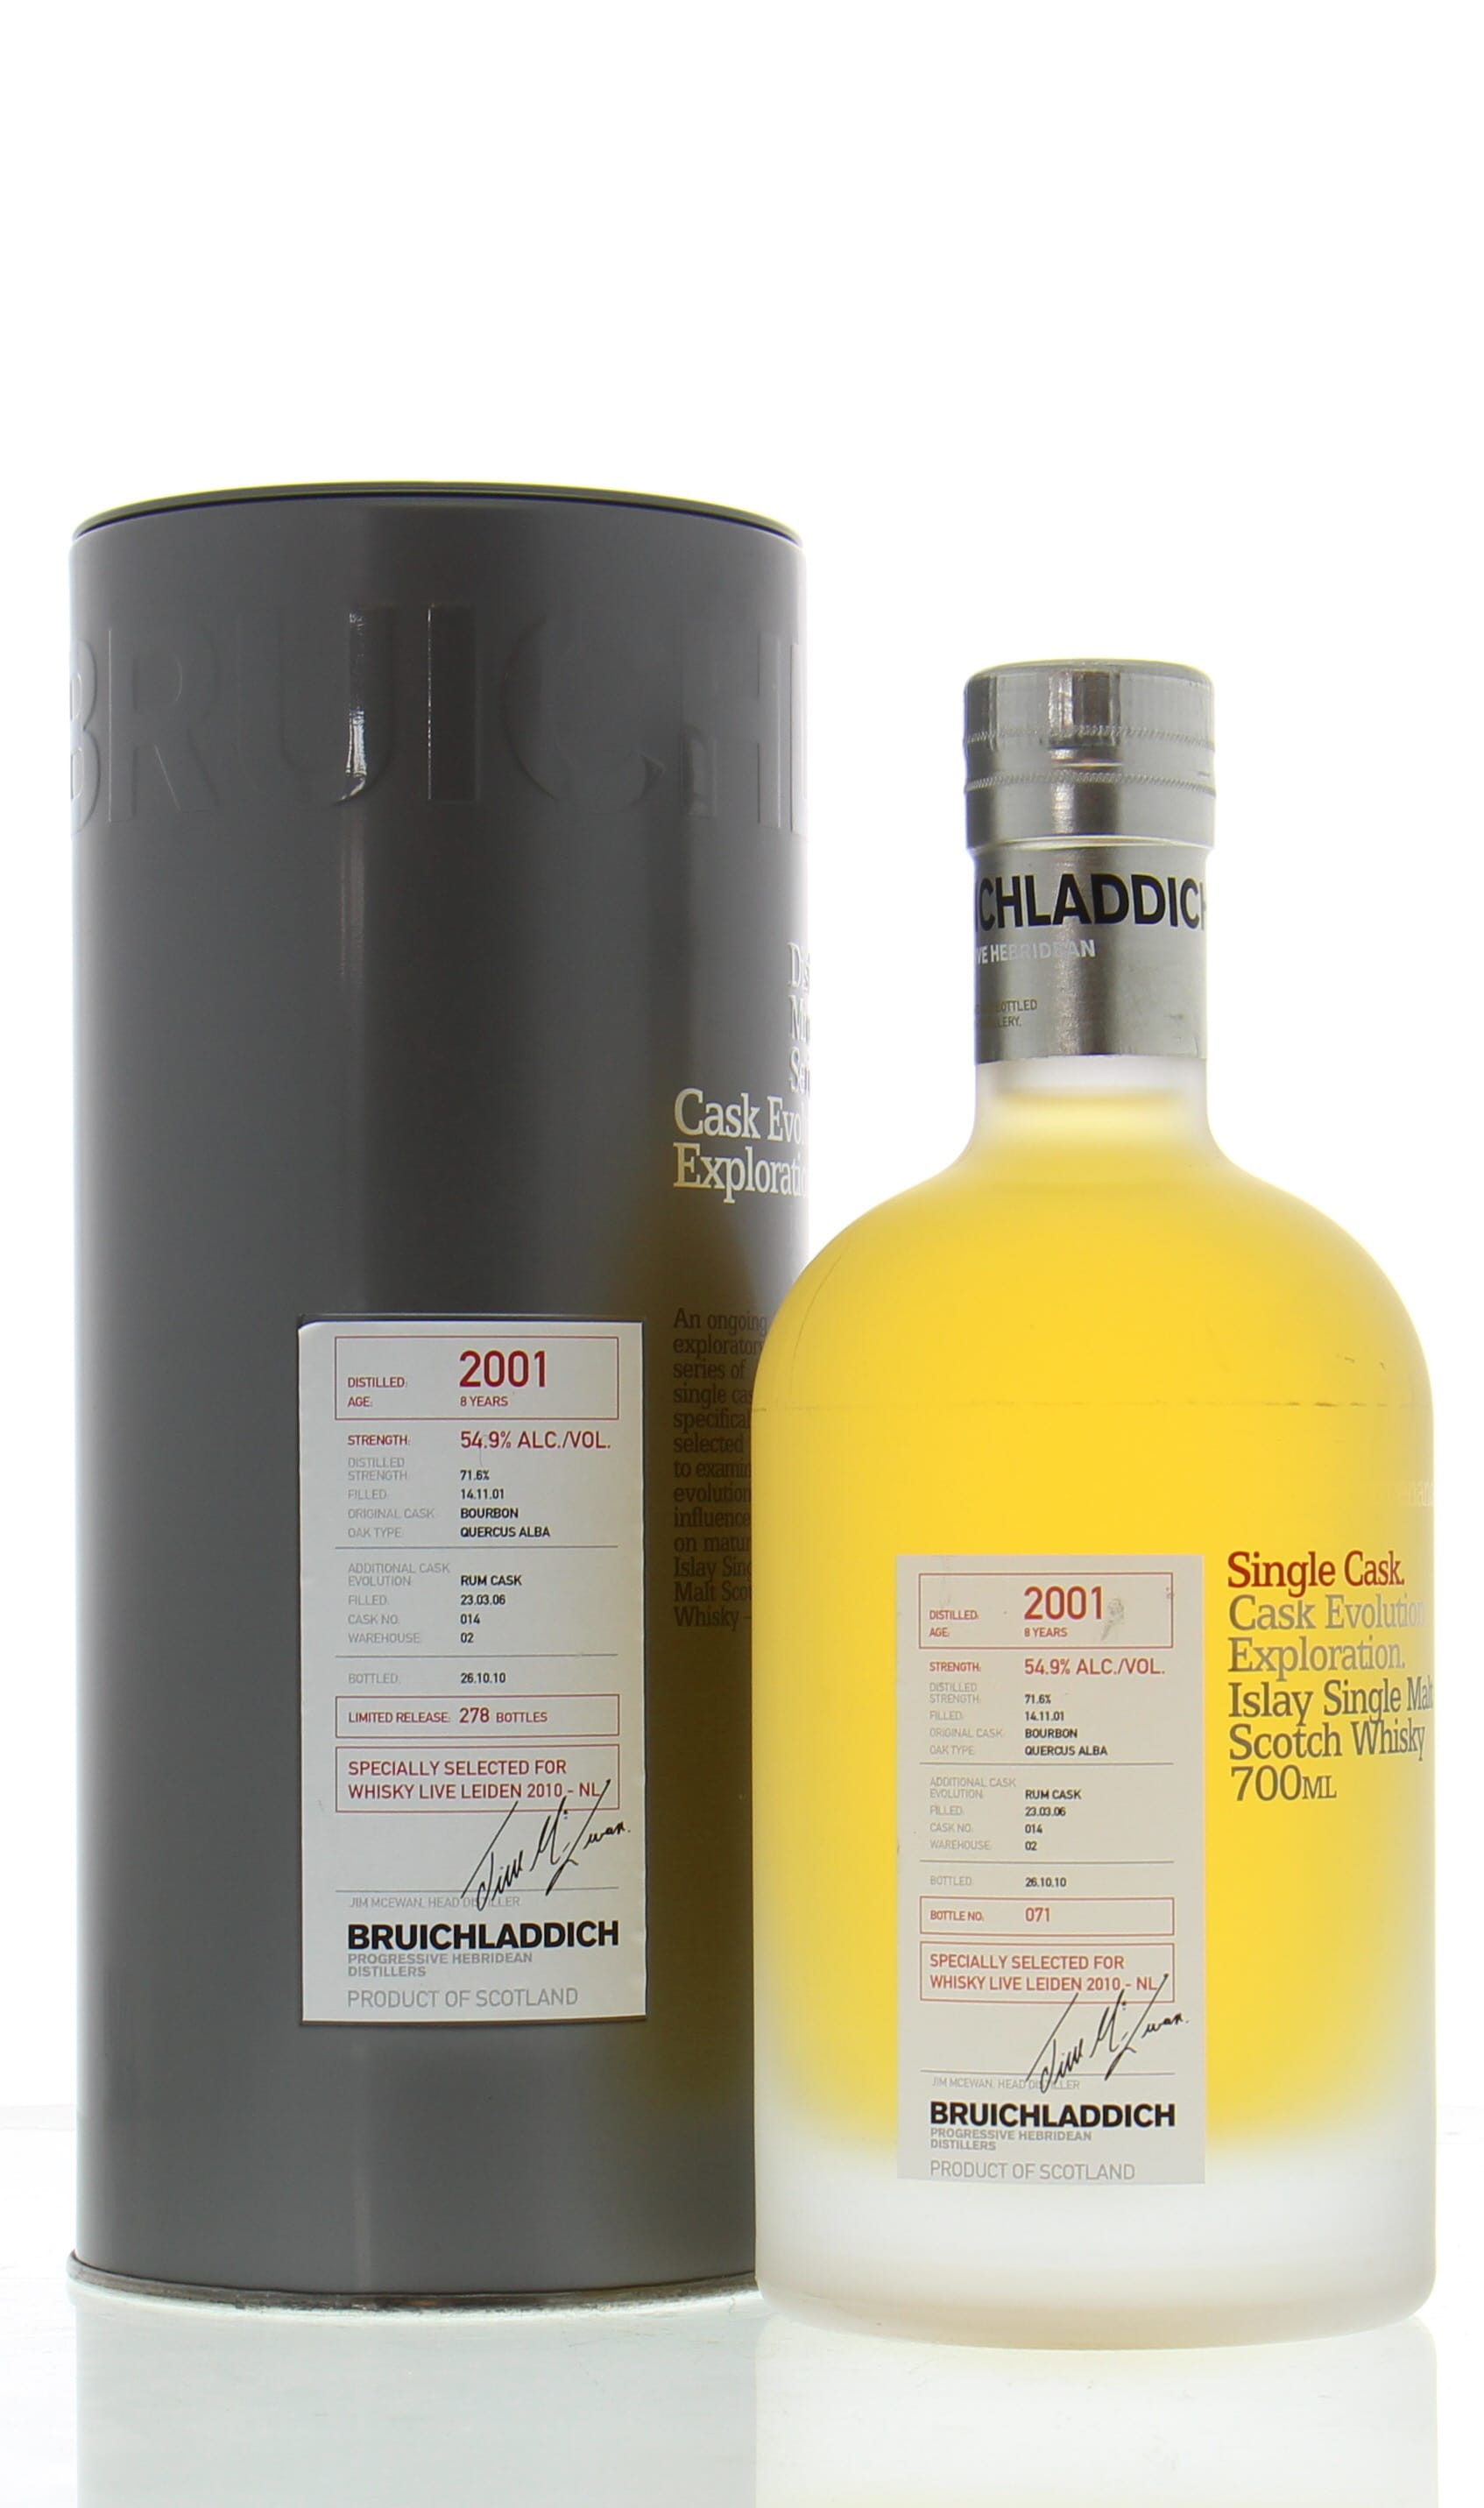 Bruichladdich - 8 Years Old Micro Provenance Series for Whisky Live Leiden Cask:014 54.9% 2001